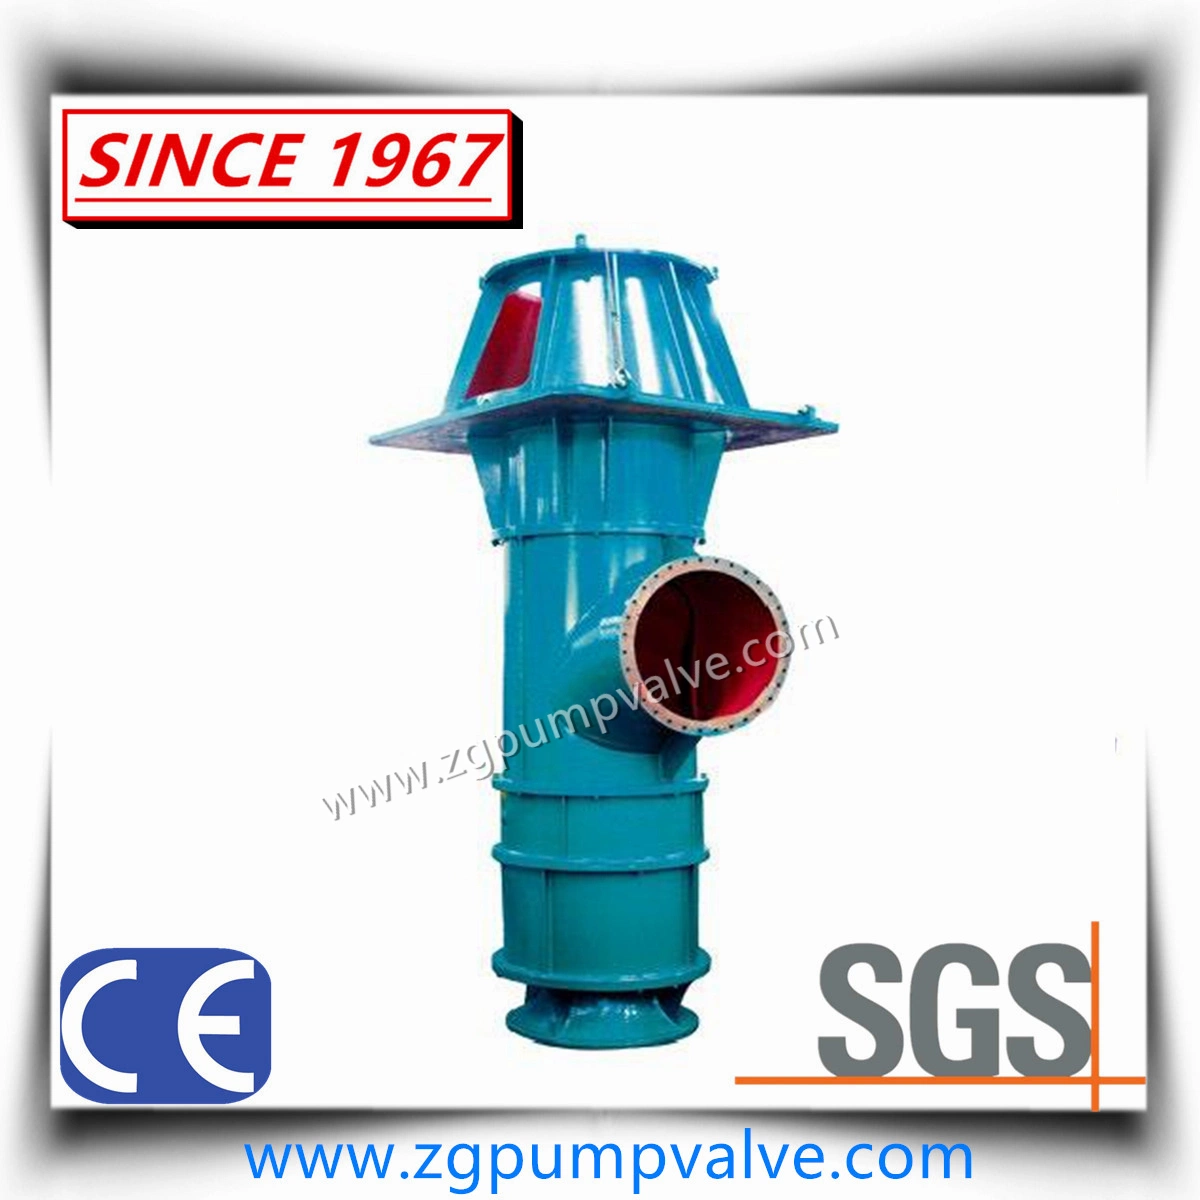 Diesel Engine and Electric Motor Long Shaft Submerged Cast Iron/Duplex Stainless Steel Vertical Axial/Mixed Flow Propeller Pump for Flood Control and Sea Water